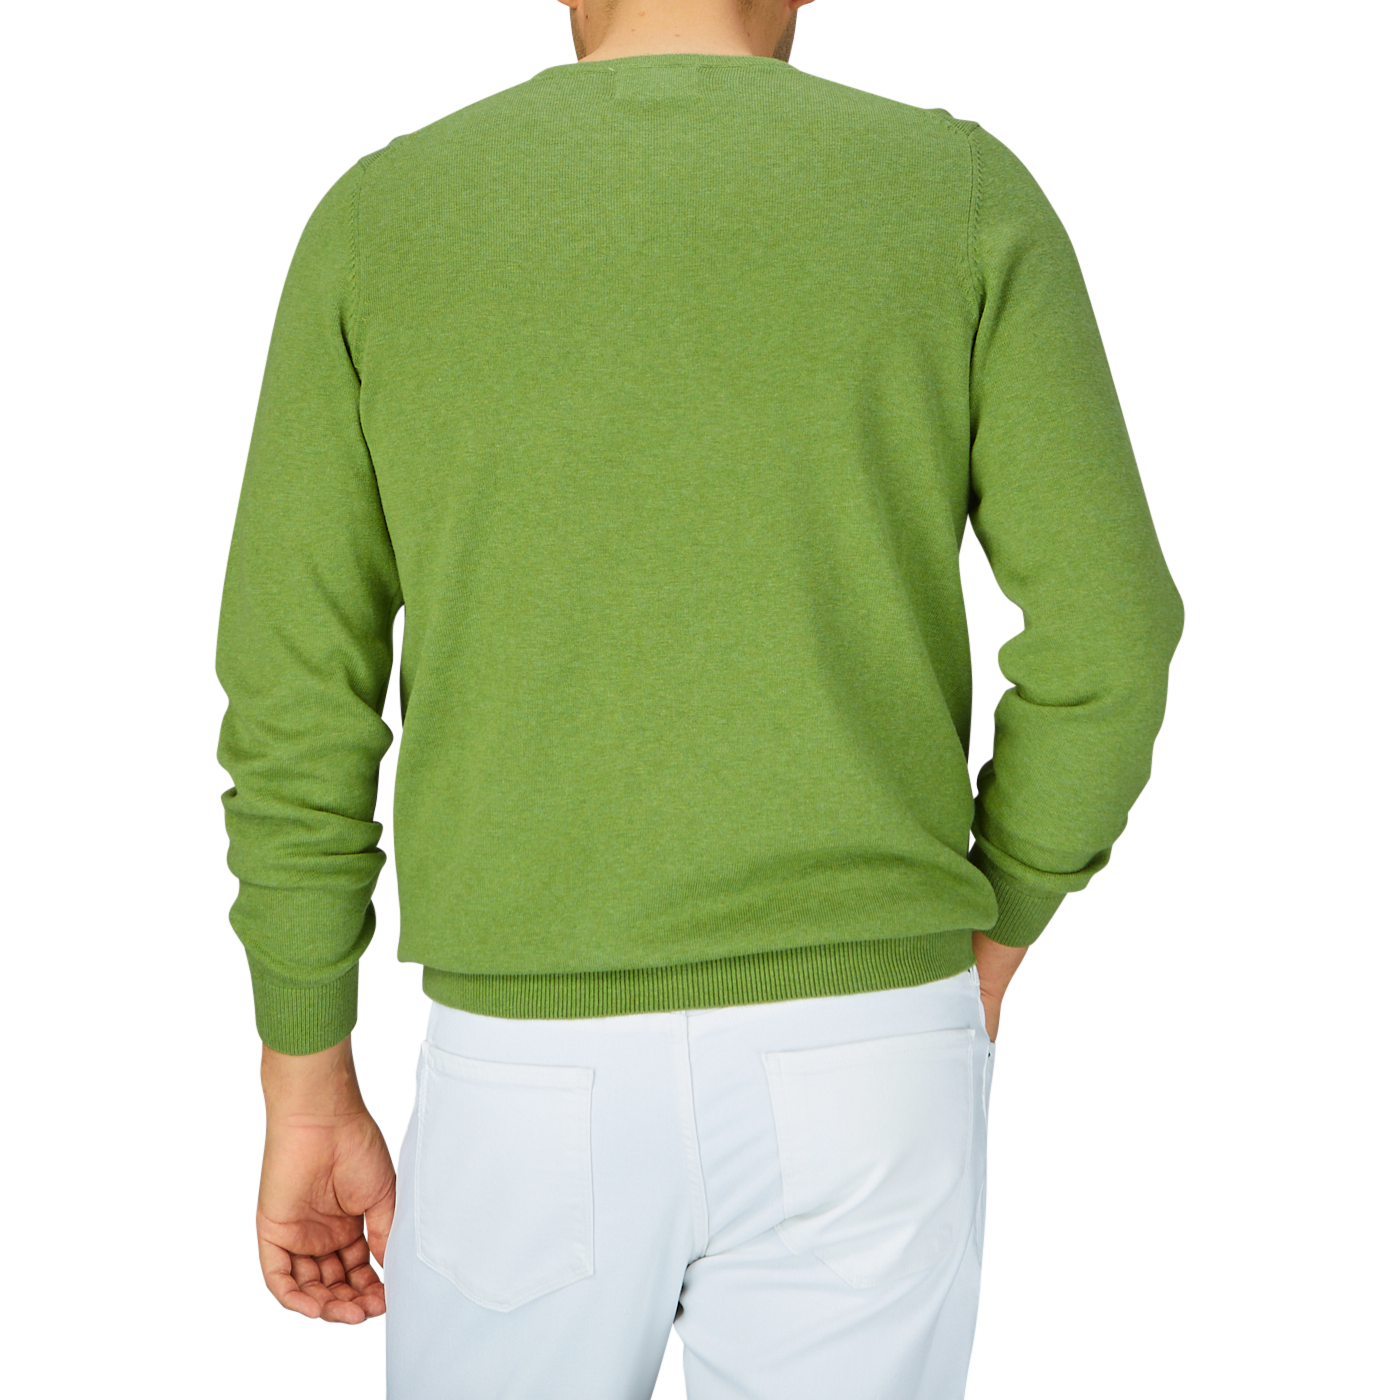 Rear view of a person wearing an Avocado Green Luxury Cotton Crewneck by Alan Paine and white pants.